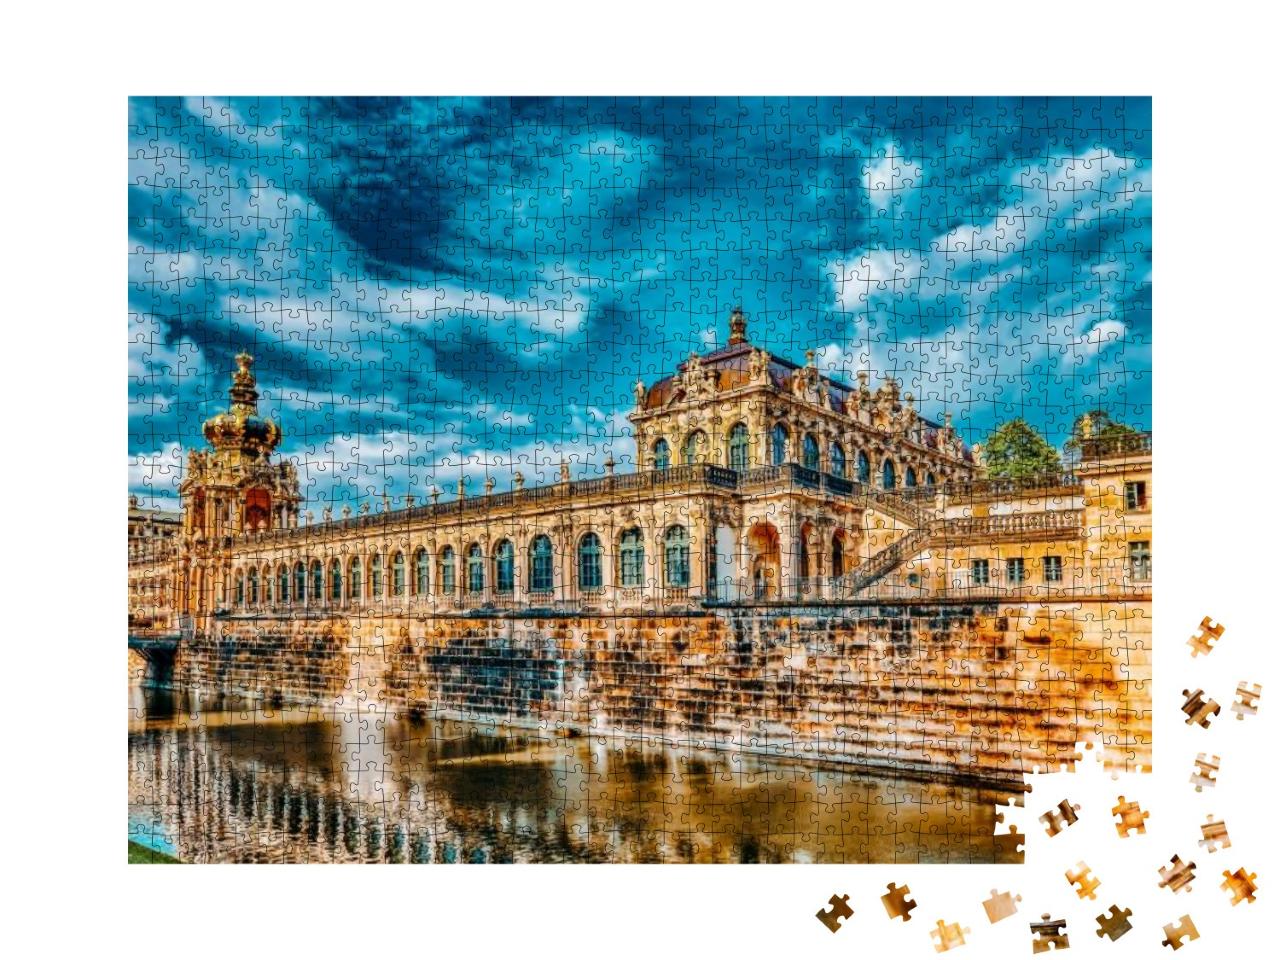 Zwinger Palace Der Dresdner Zwinger Art Gallery of Dresde... Jigsaw Puzzle with 1000 pieces